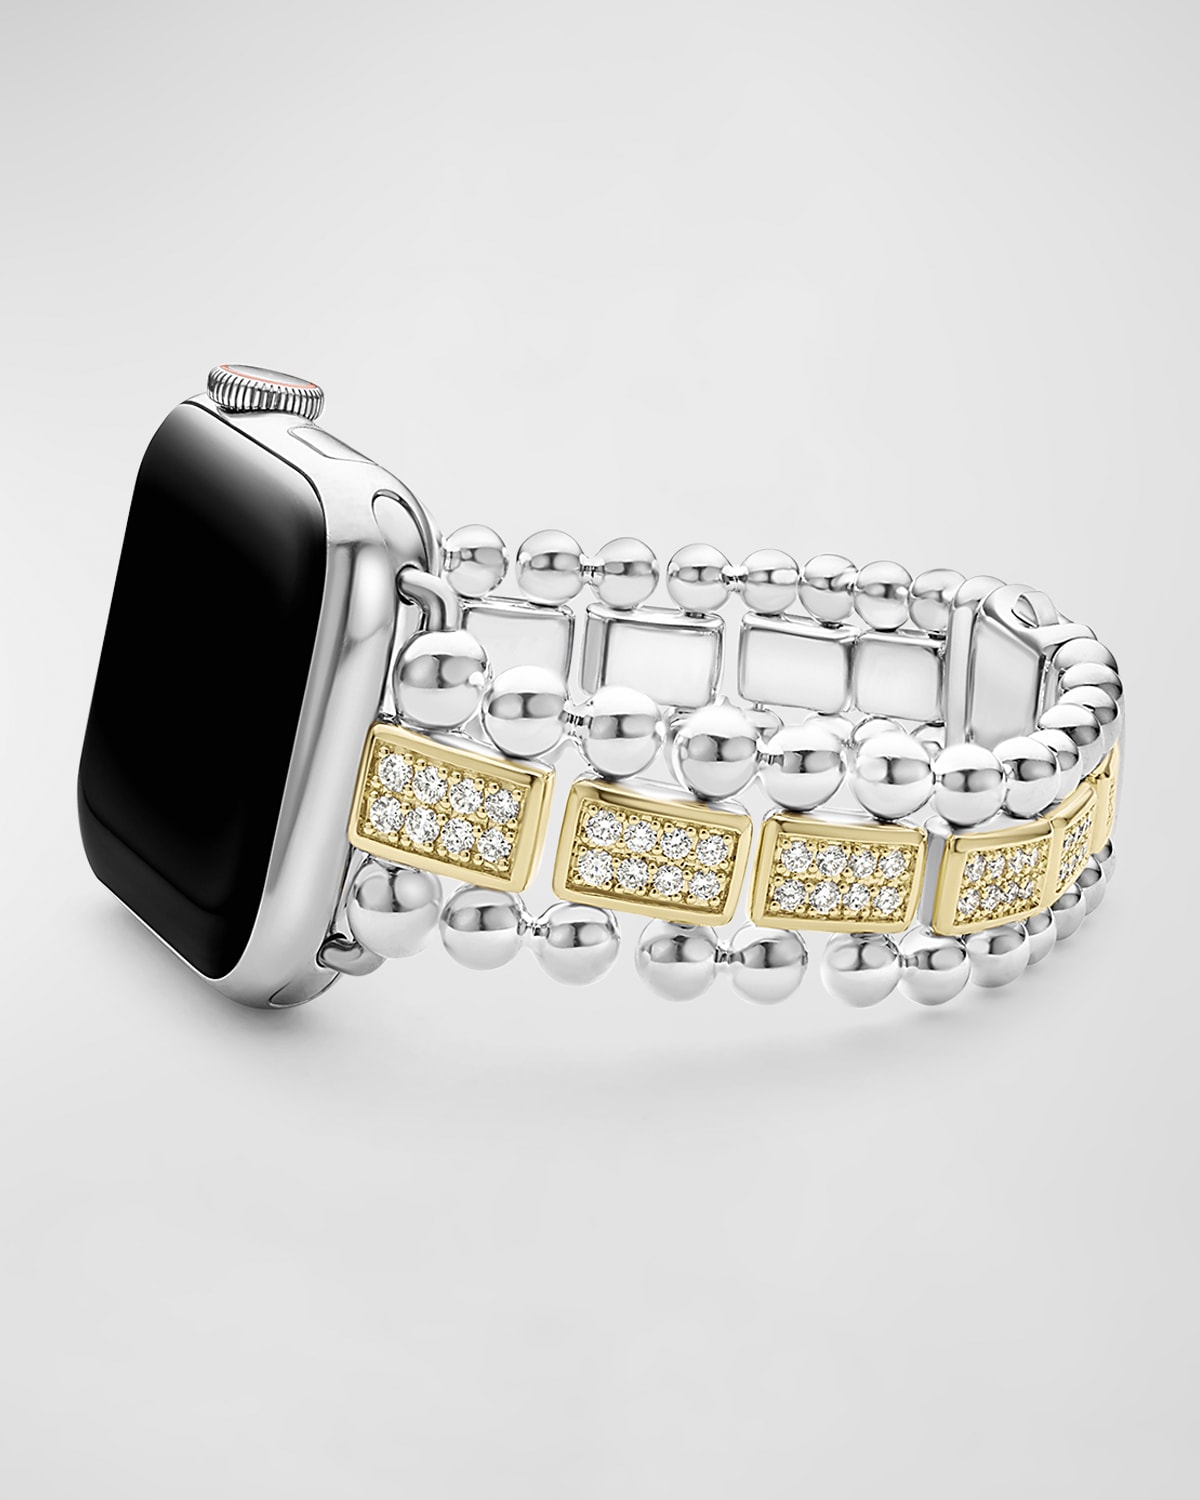 Smart Caviar Two-Tone Sterling Silver and 18k Yellow Gold Full Diamond Apple Watch Bracelet, 38-45mm